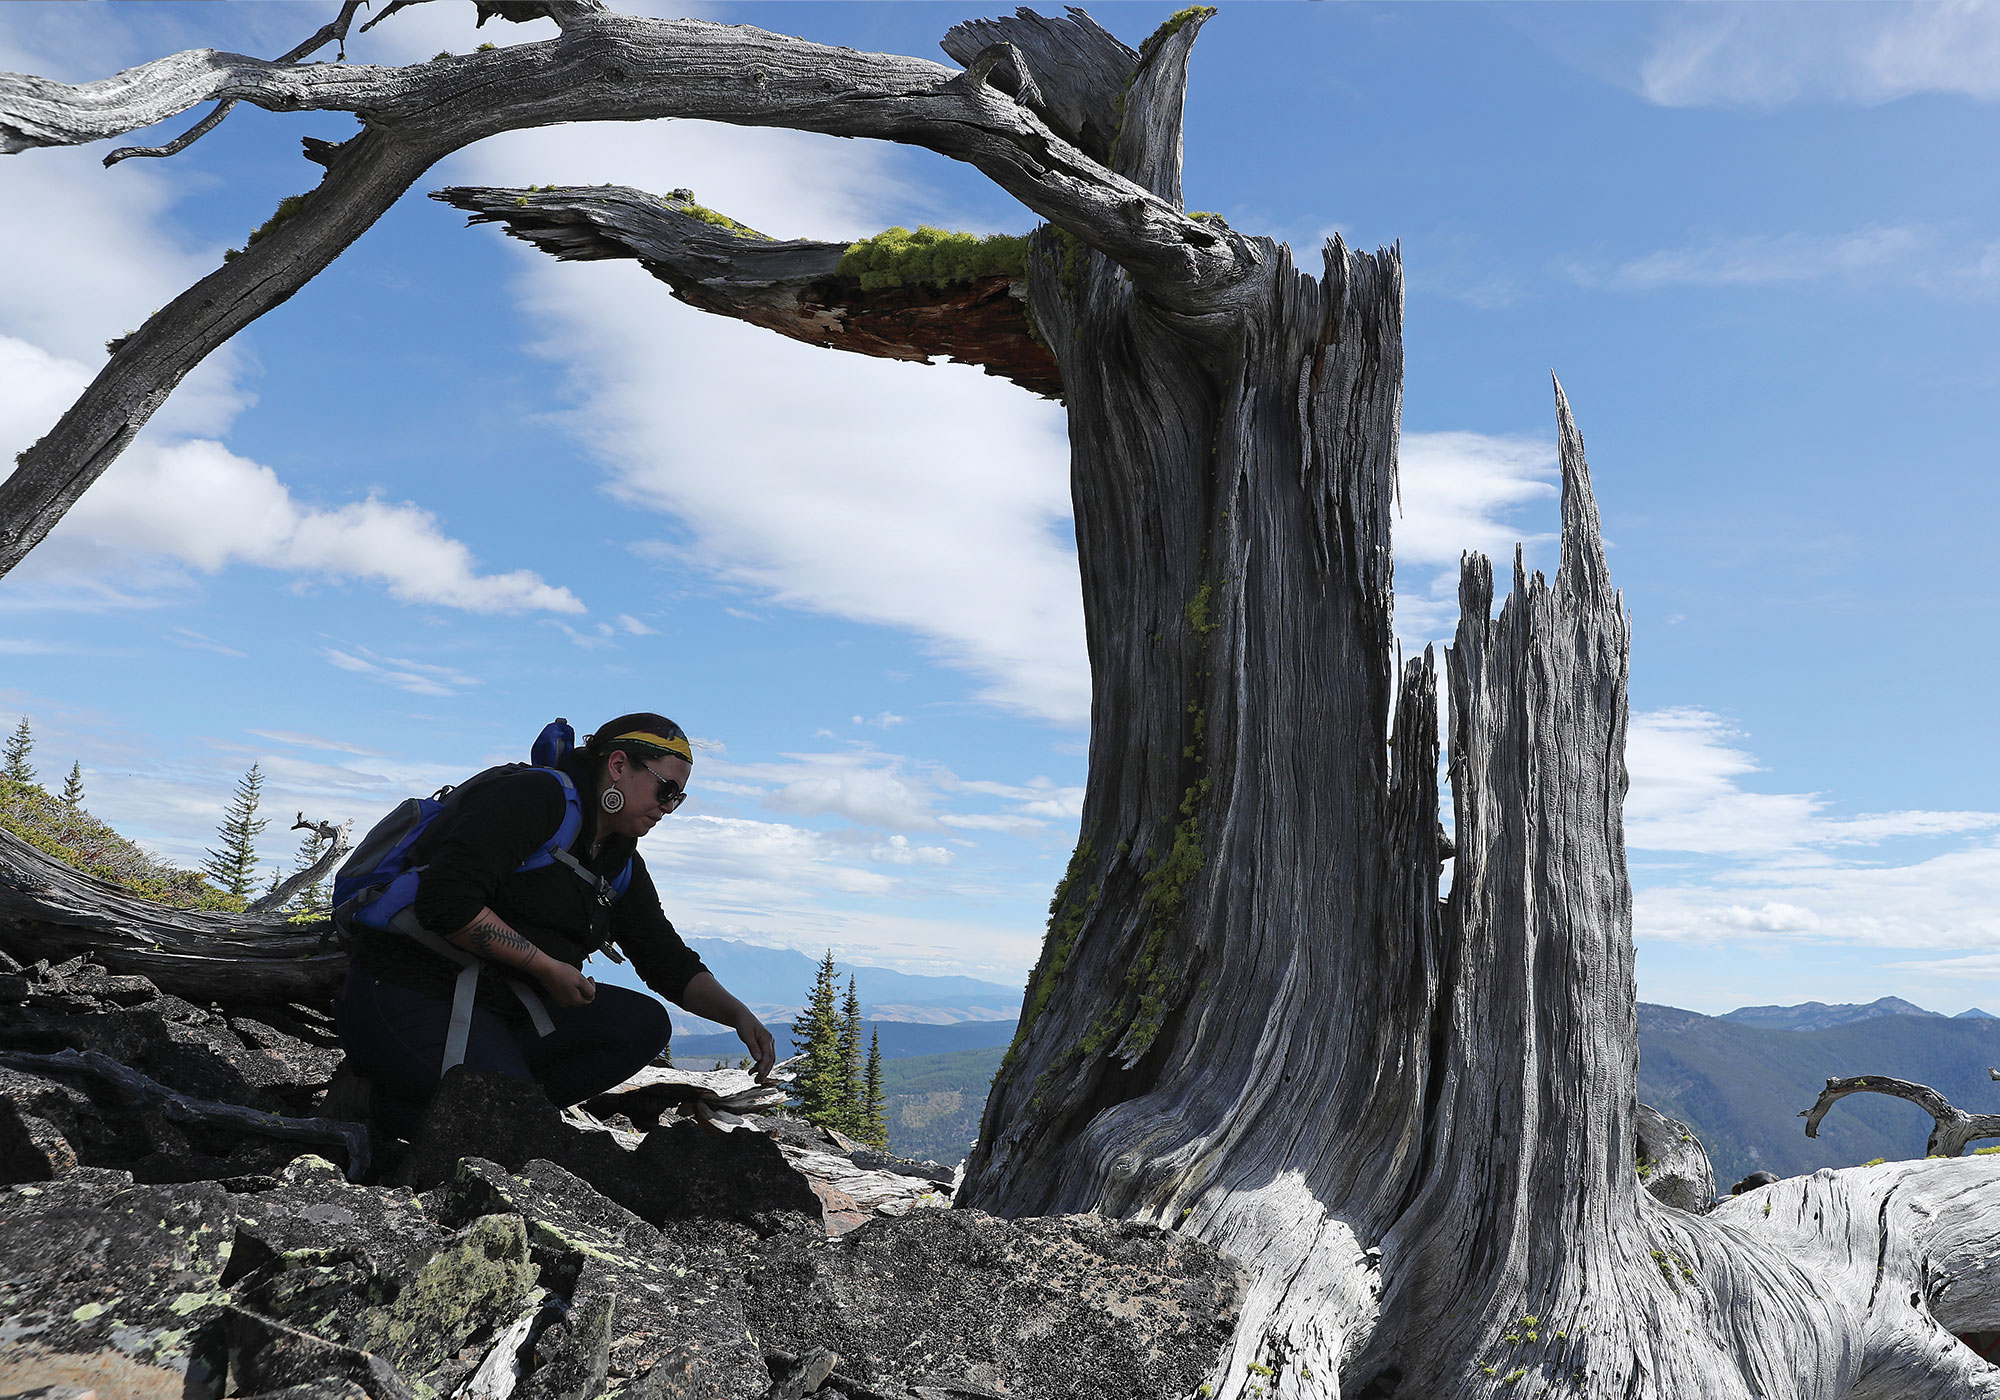 Ecologist leaving a gift of tobacco at what remains of a 2000-year-old white-bark pine tree